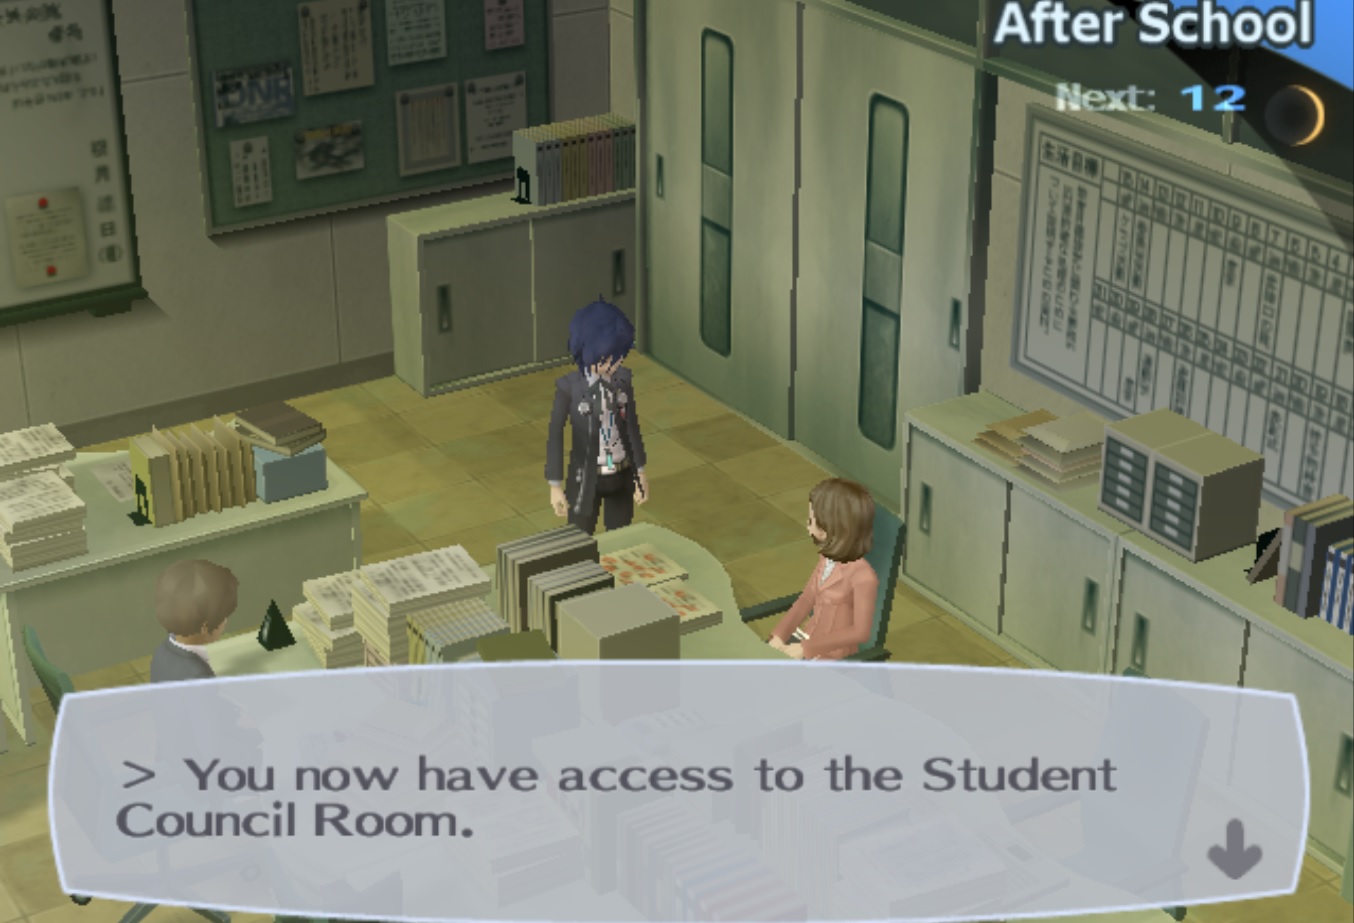 Access to Student Council Room